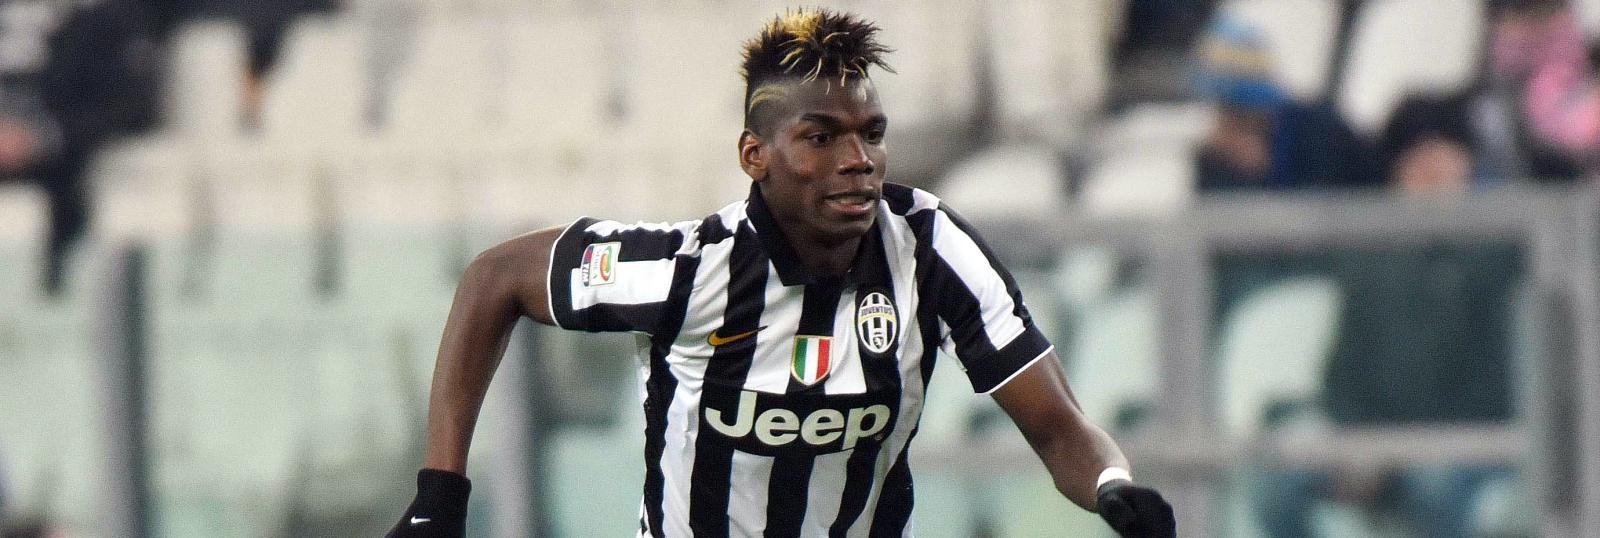 Manchester United’s £100m target ready to sign new Juventus deal, according to agent